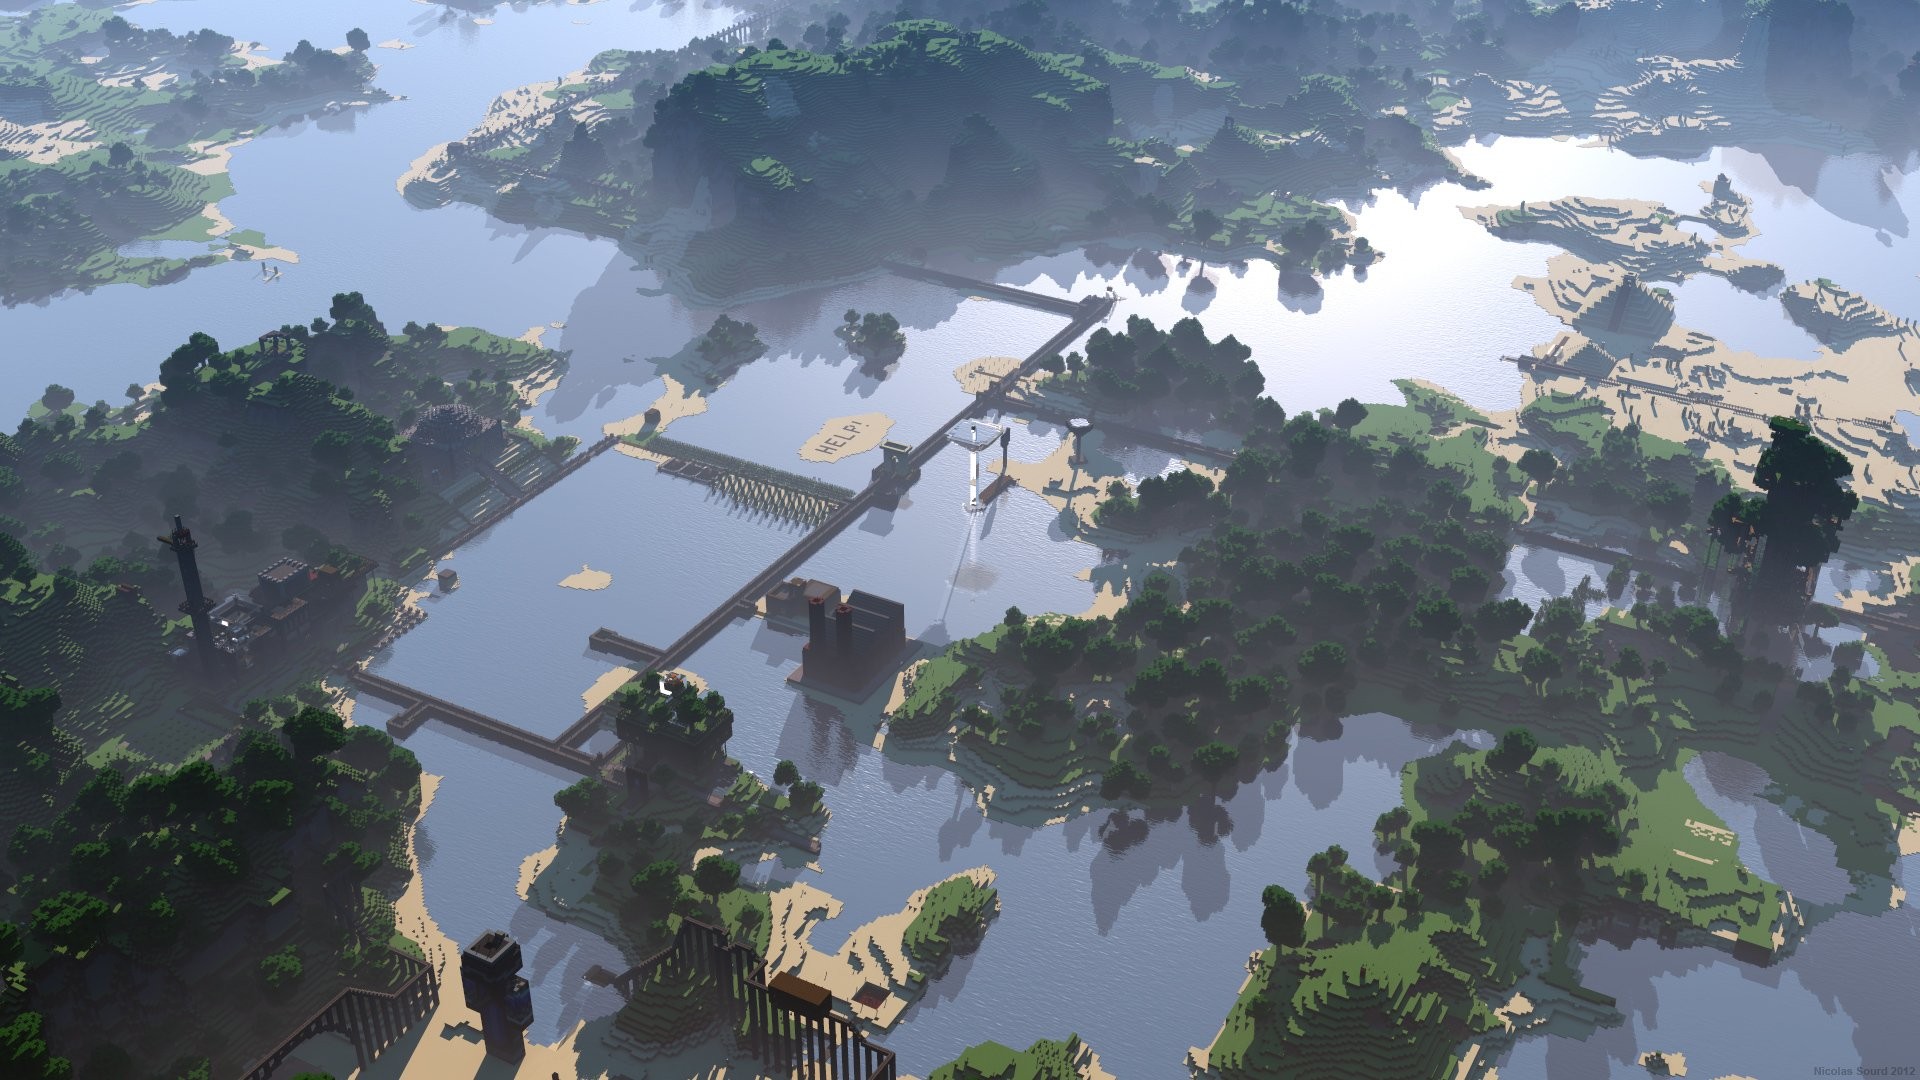 Minecraft HD wallpaper ·① Download free awesome HD ...